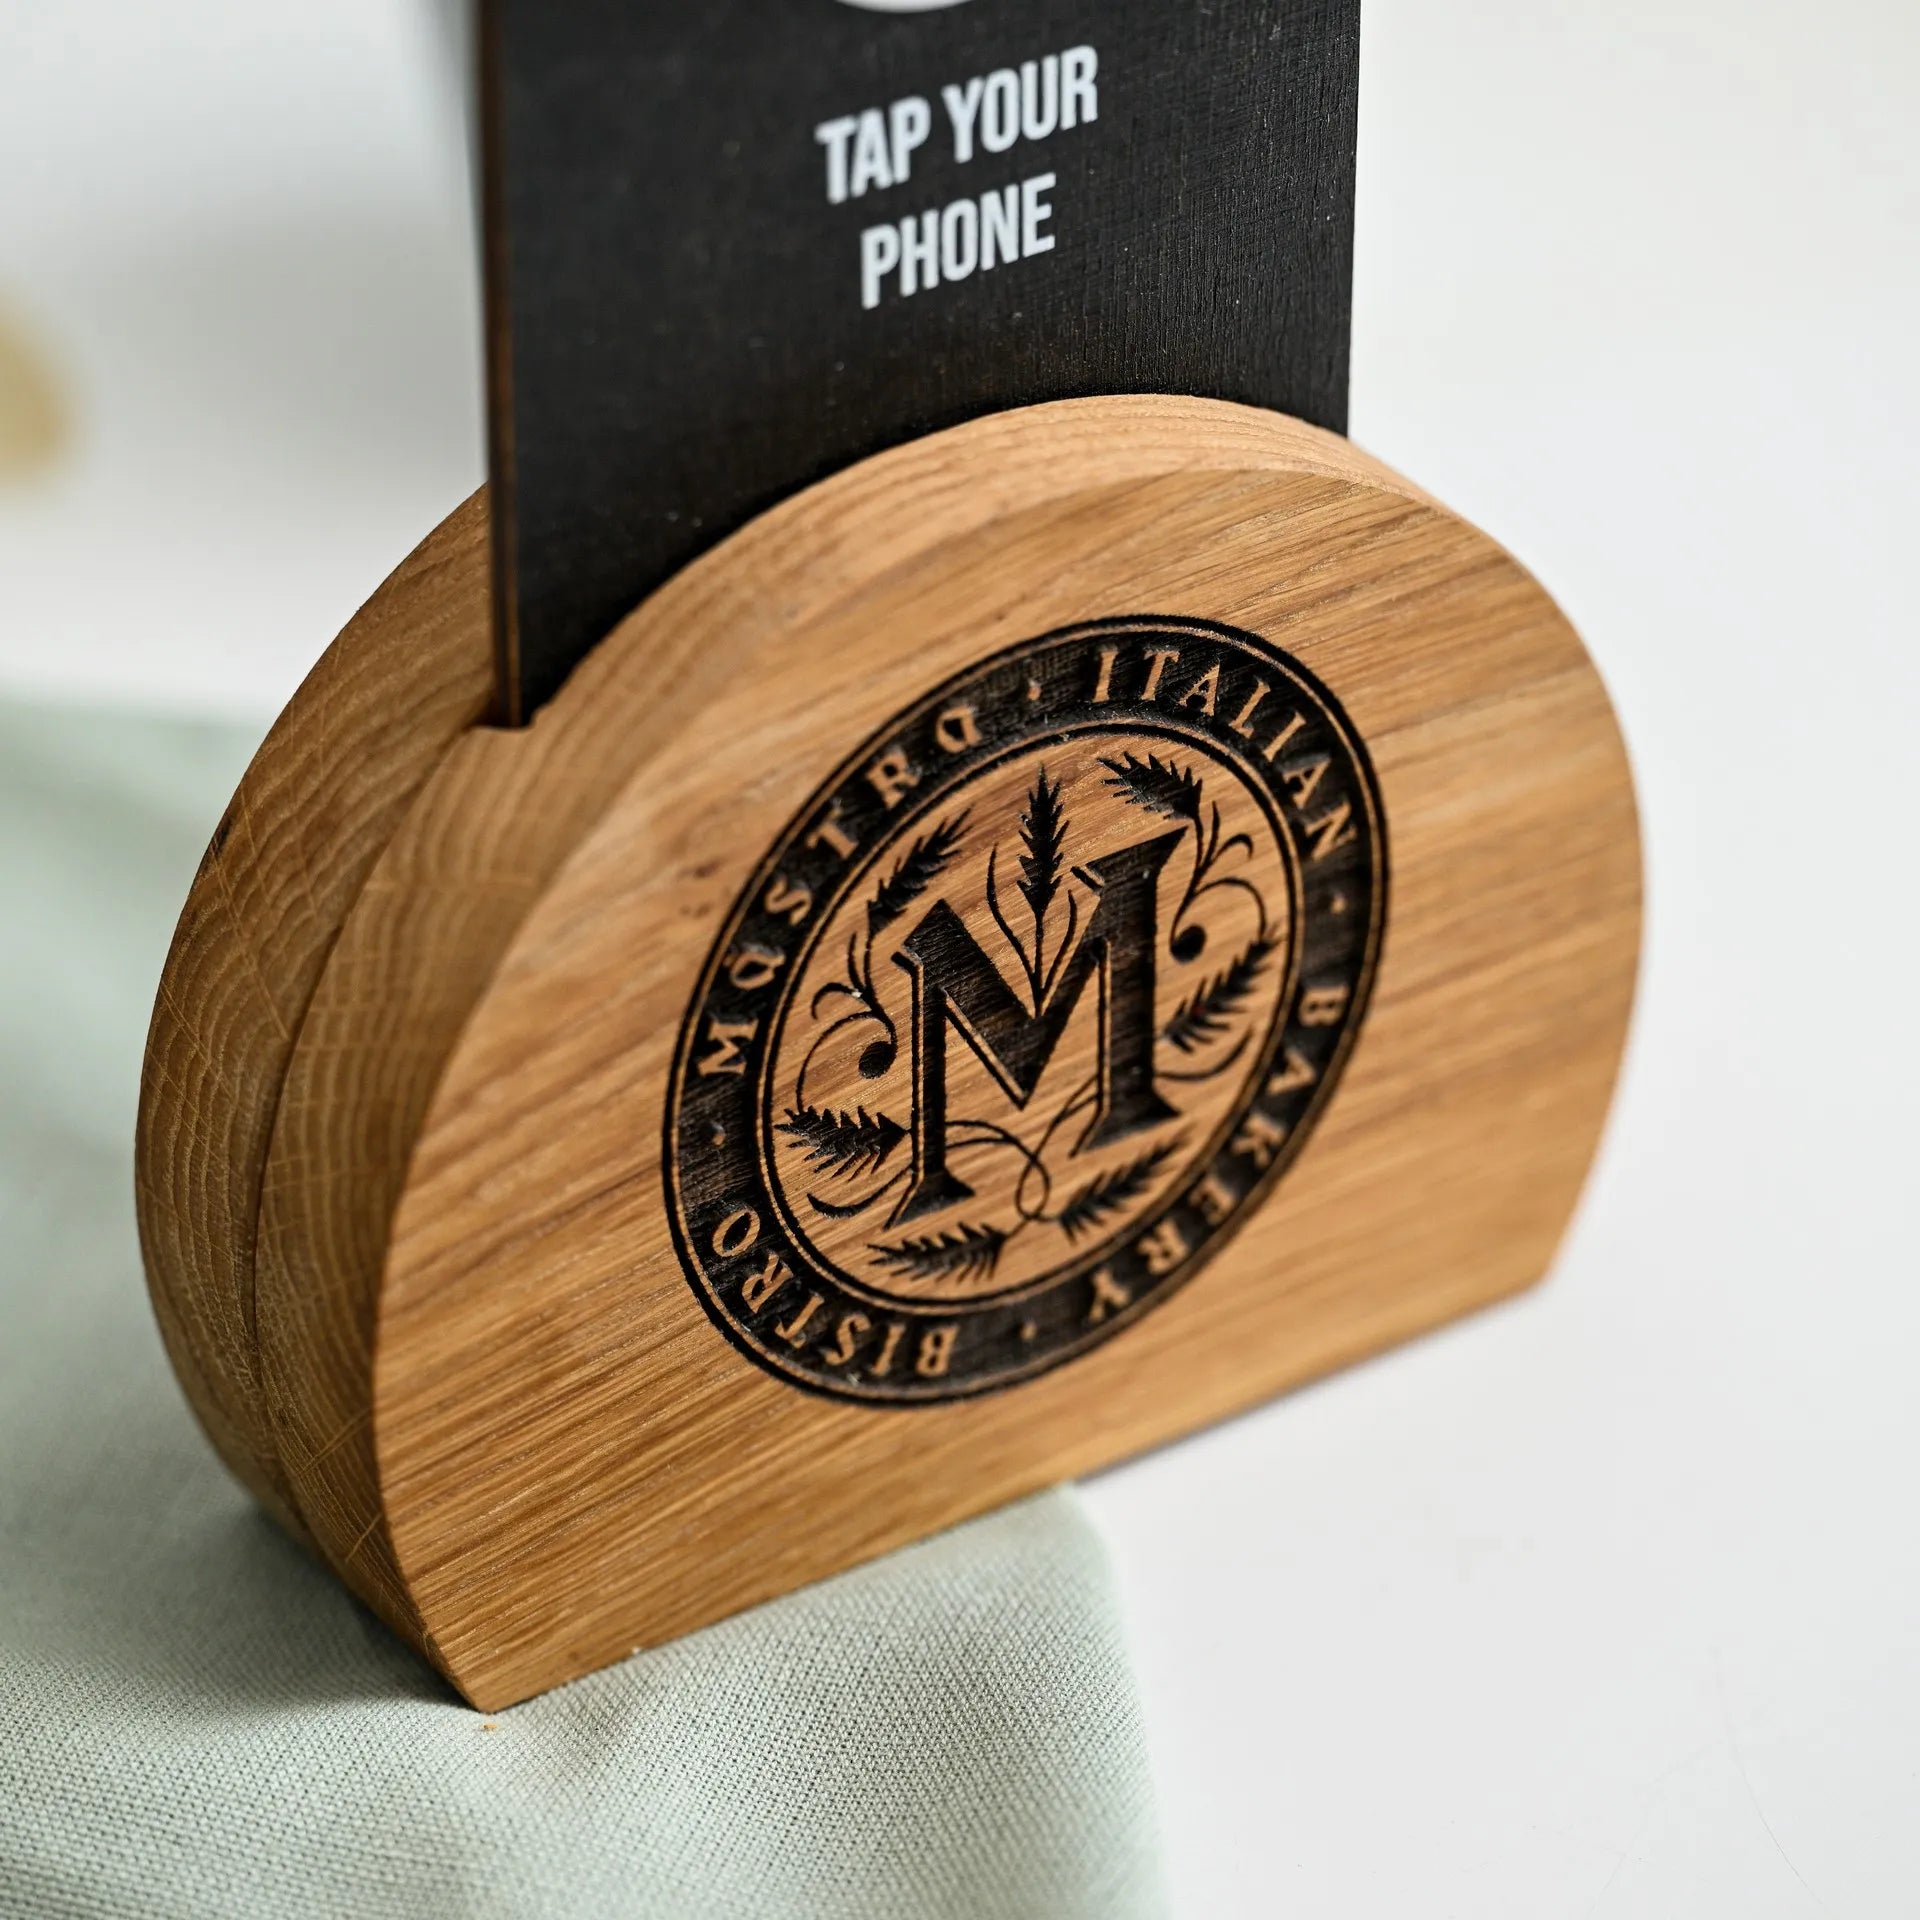 Immerse diners in a seamless dining experience with our NFC tag and QR code sign, elegantly showcased on a wooden stand for easy interaction.